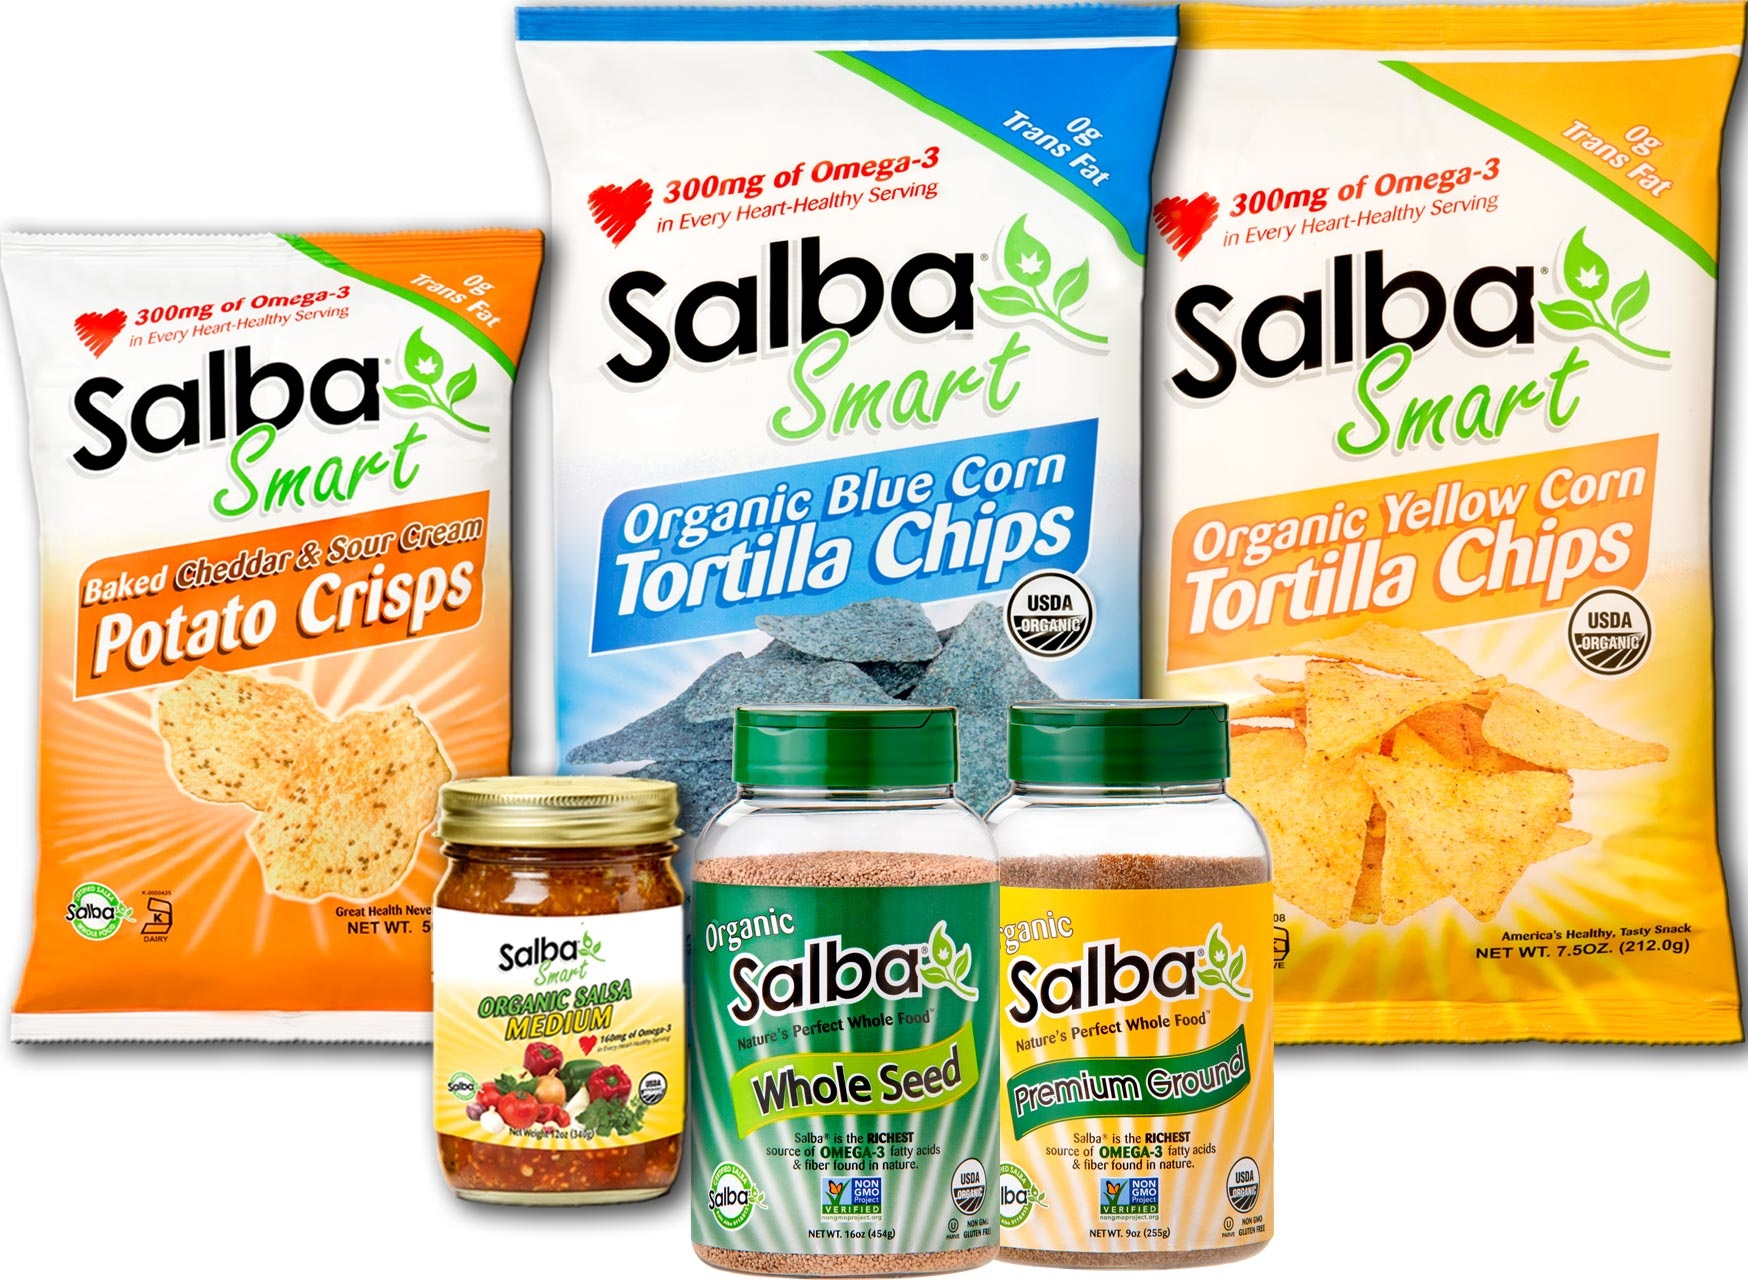 Salba Smart Review & #Giveaway